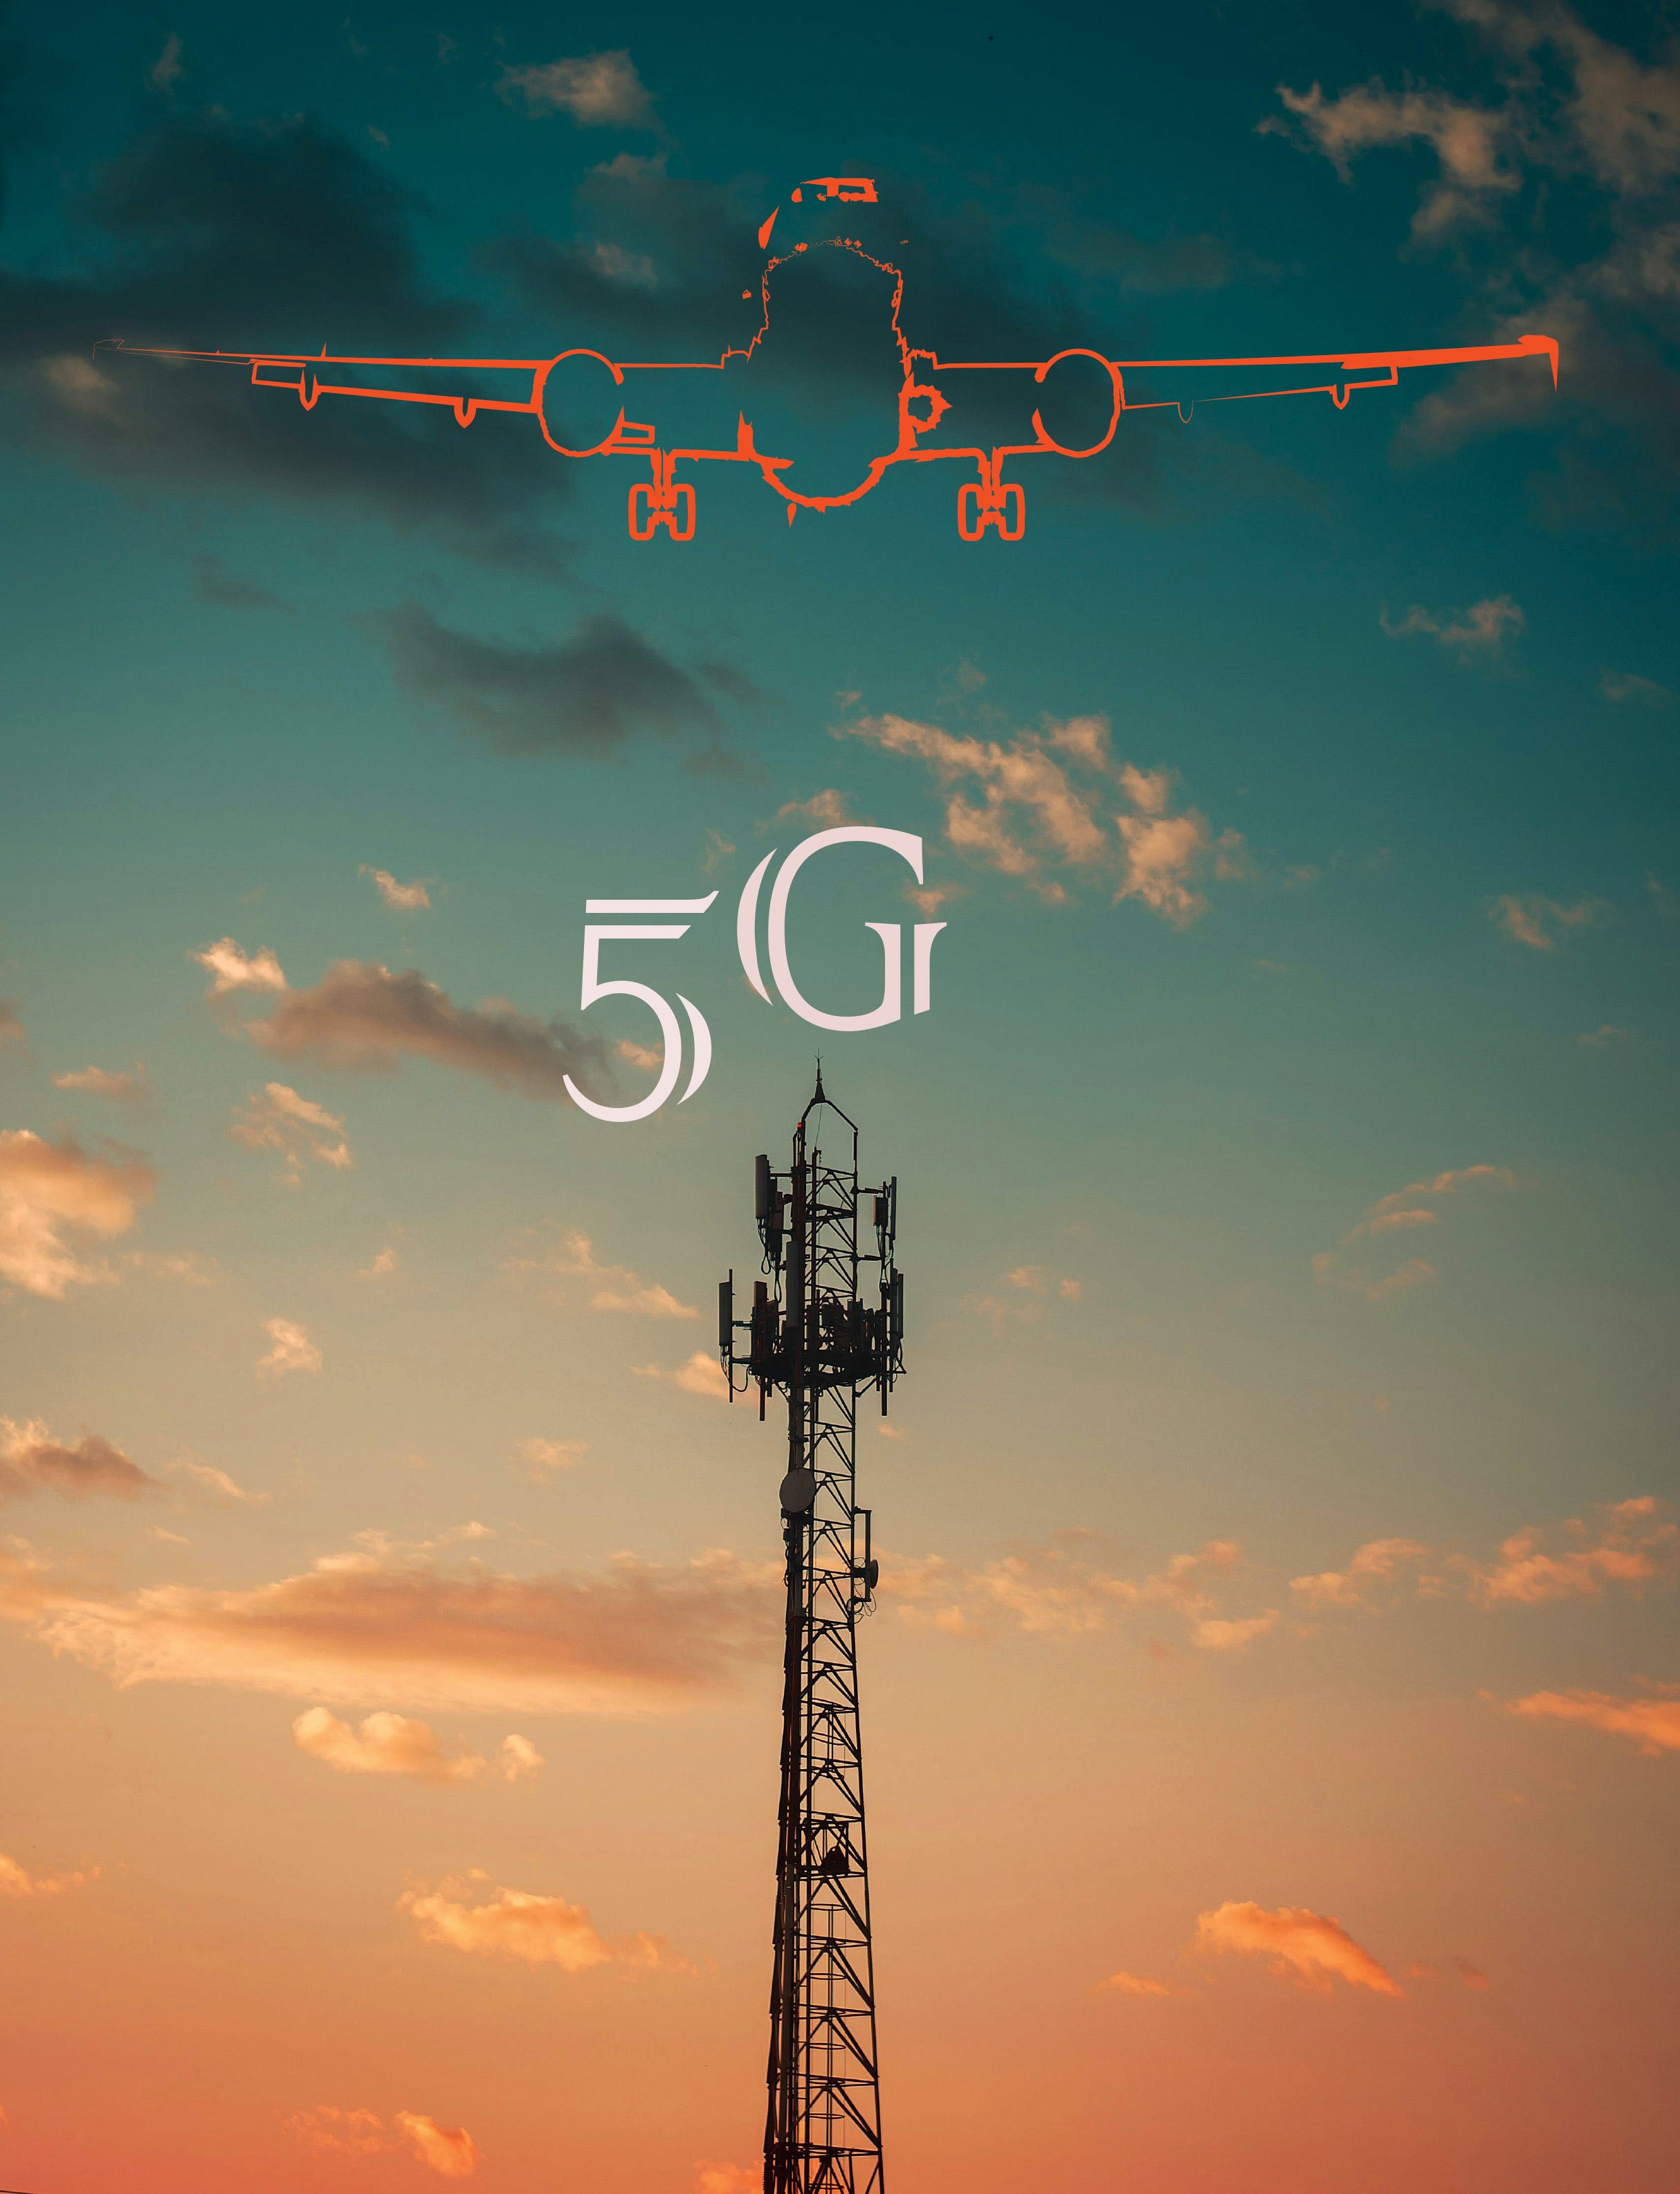 Safe Skies Ahead: How 5G and Aviation Coexist Without Compromise